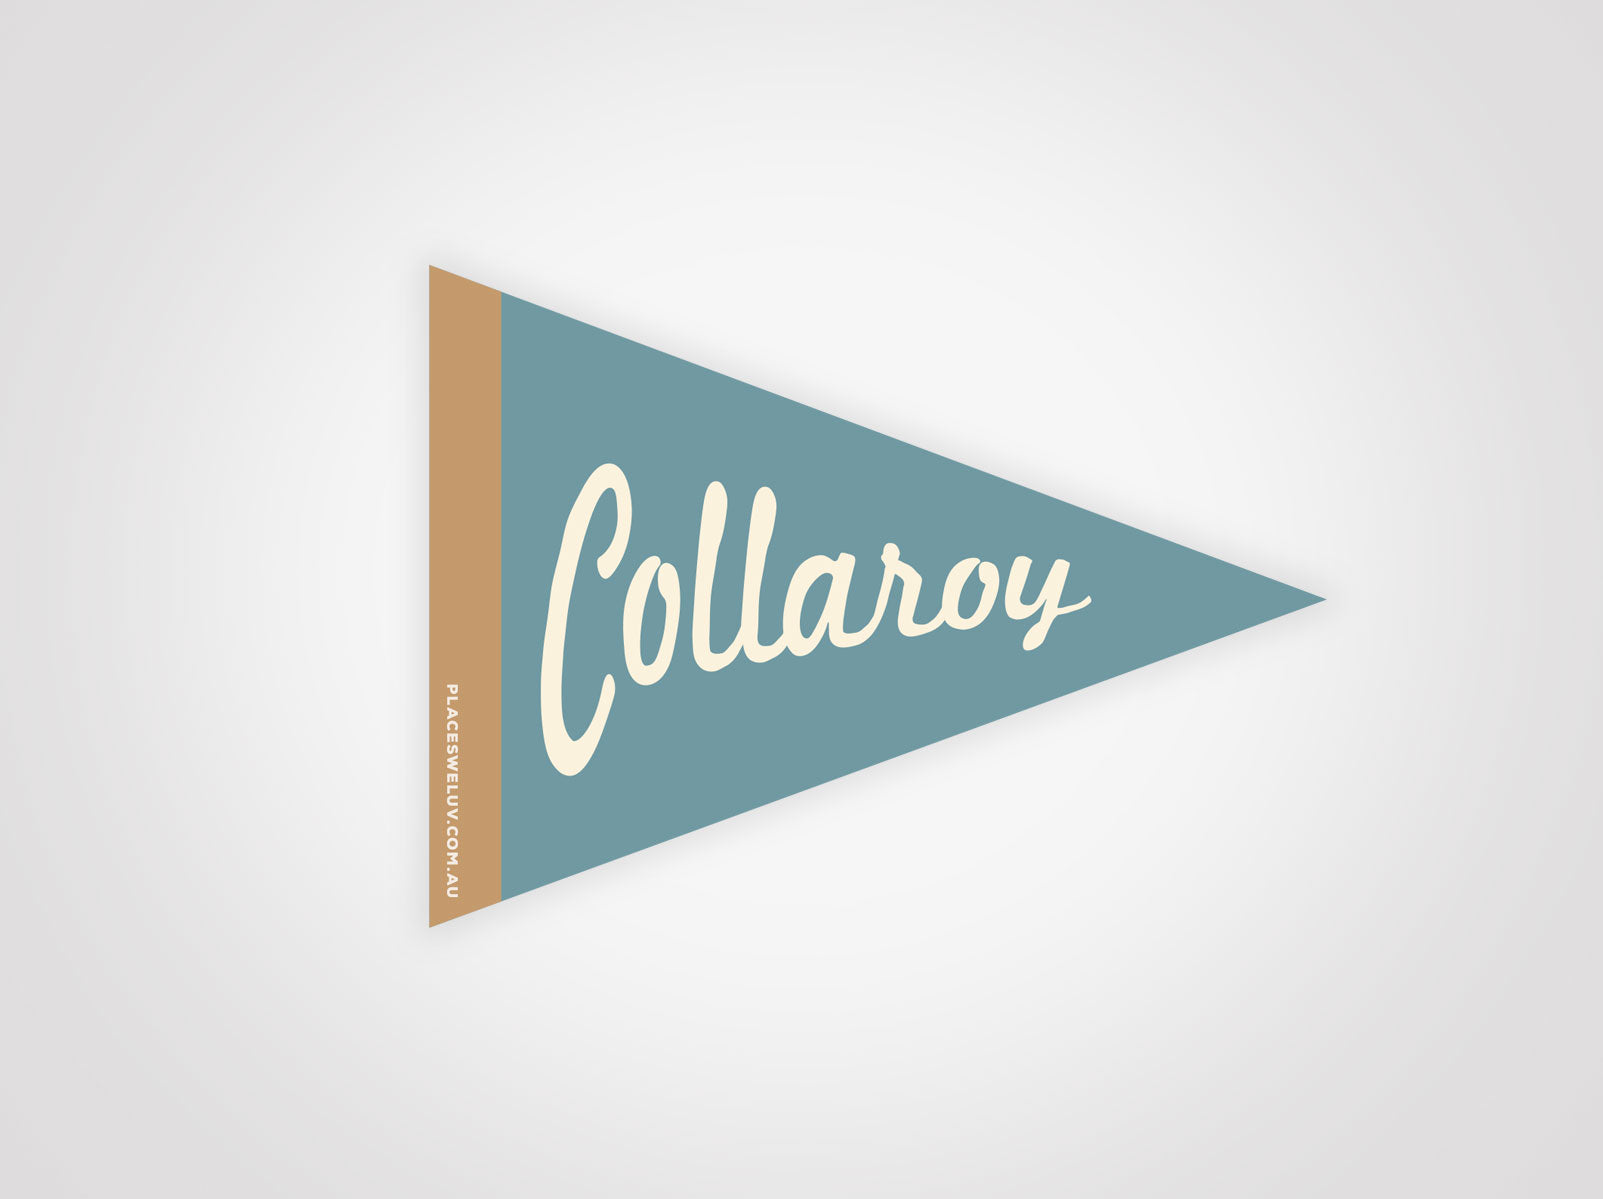 Collaroy vintage travel style Flag decal retro design by place we luv